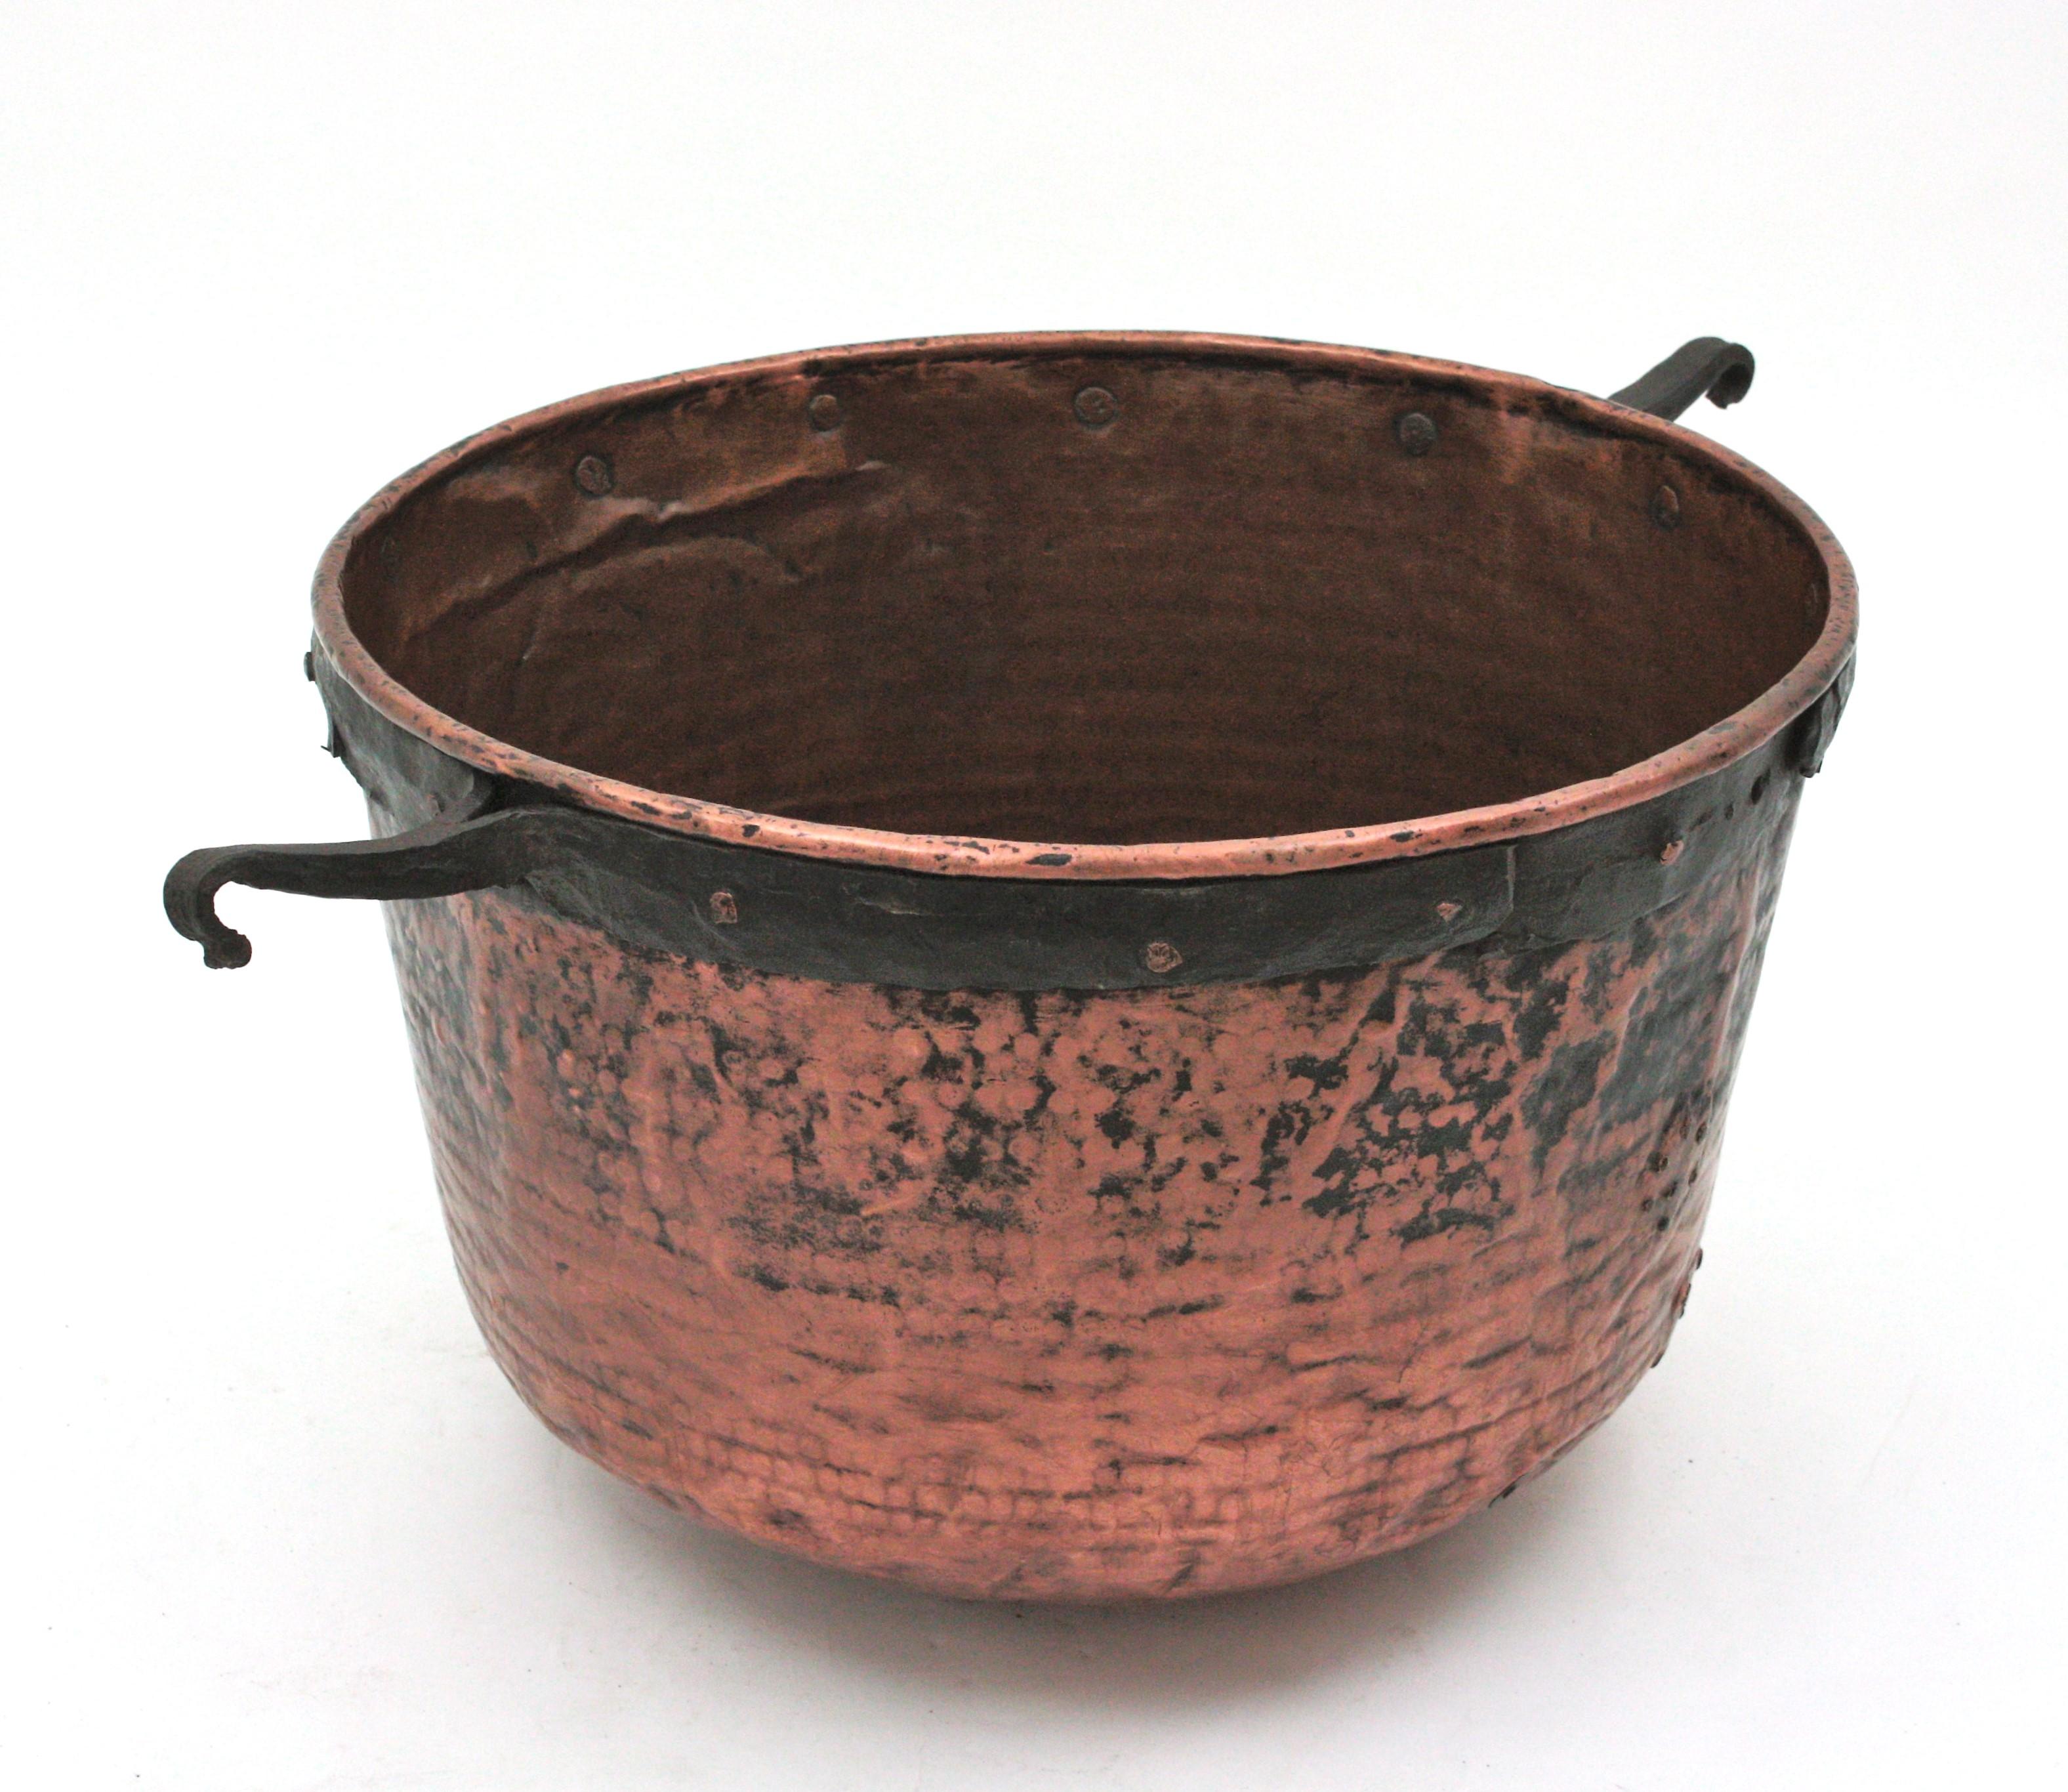 Massive Spanish Copper Cauldron with Iron Hook Handles For Sale 12